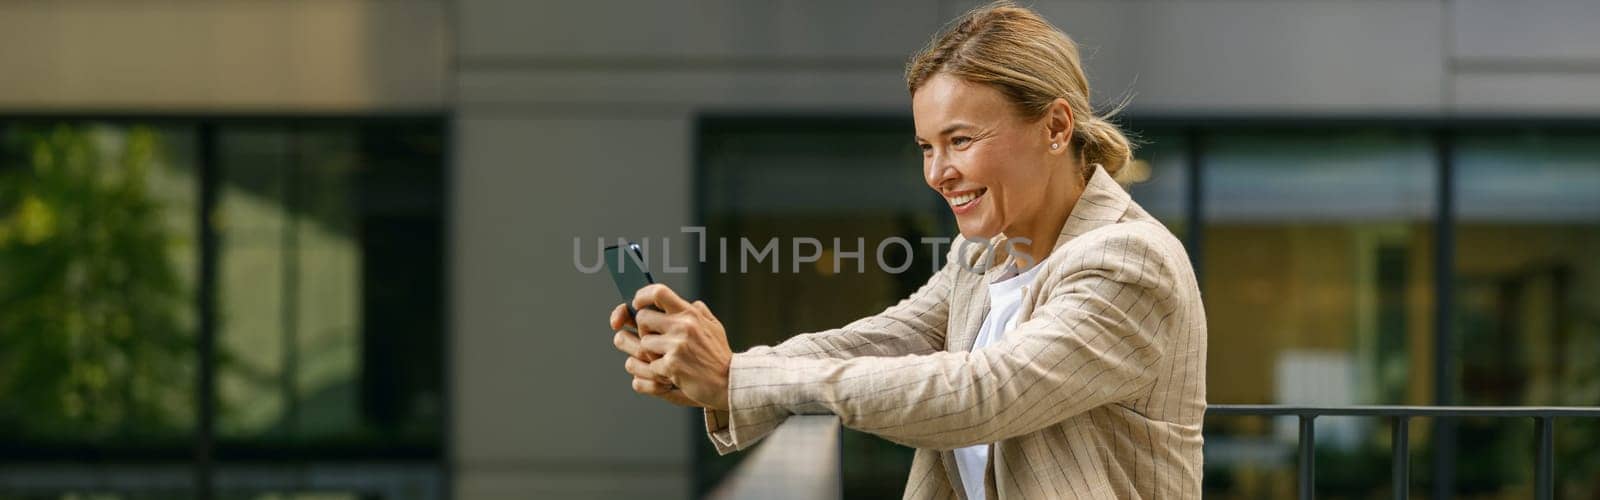 Smiling business woman holding phone while standing on modern office terrace